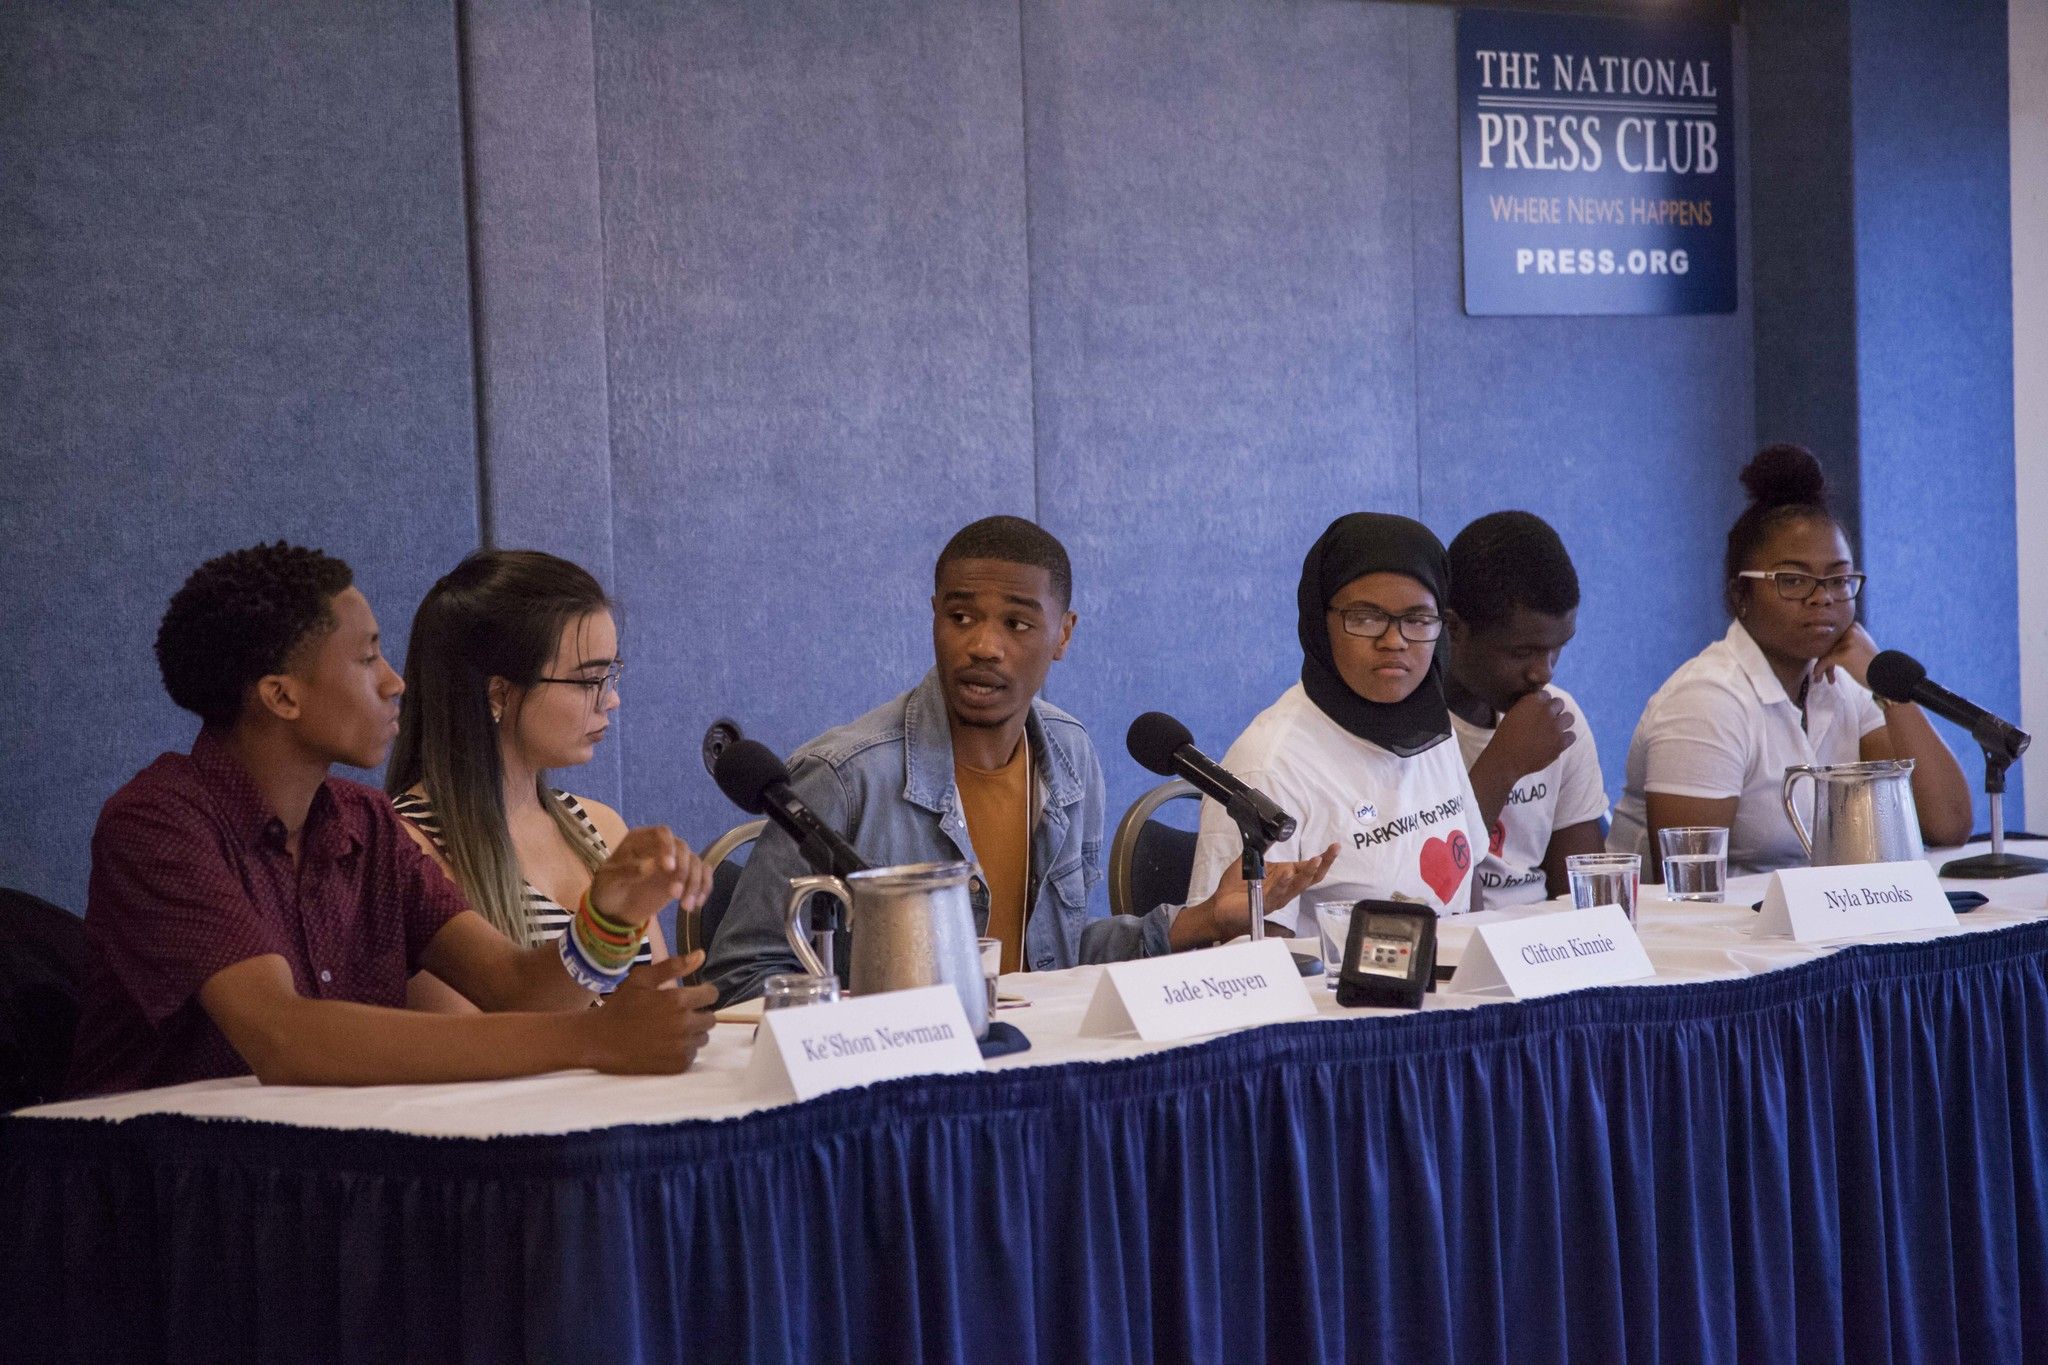 Clifton Kinnie moderates the dialogue at "Youth Activists and the Media: Reporting on Gun Violence." Image by Jin Ding. Washington, DC, 2018.